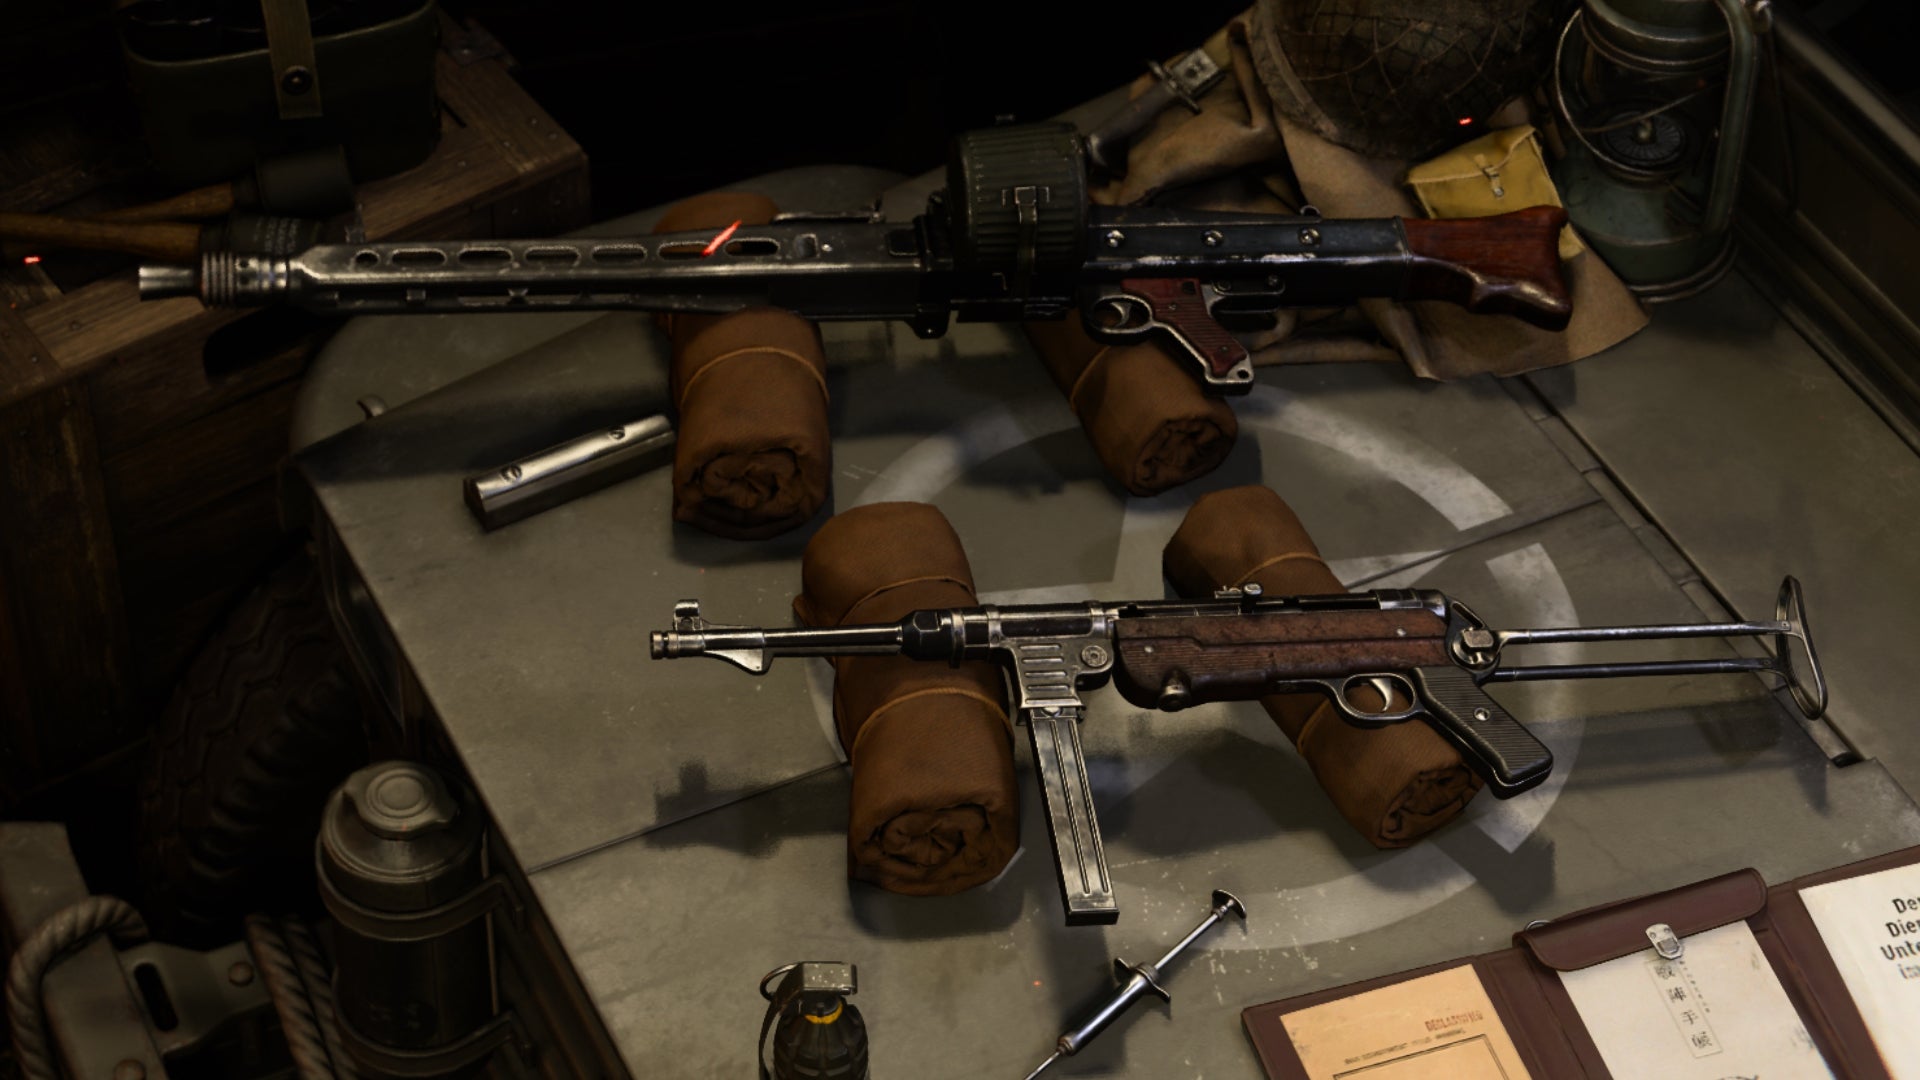 the MG42 lying next to the MP40 in the Gunsmith screen of Call Of Duty: Vanguard.